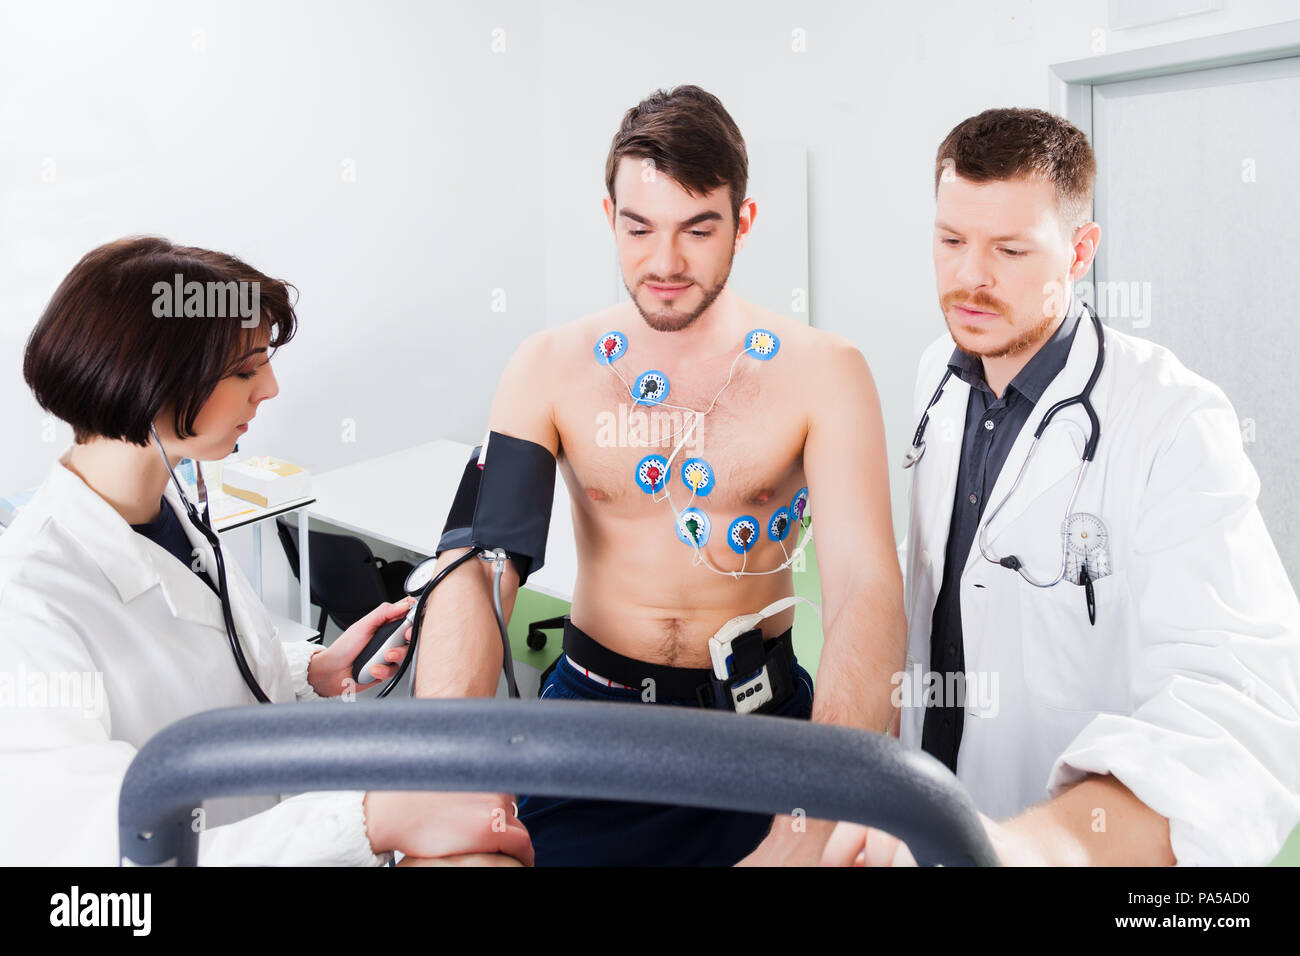 Athlete does a cardiac stress test in a medical study, monitored by the doctor and nurse Stock Photo